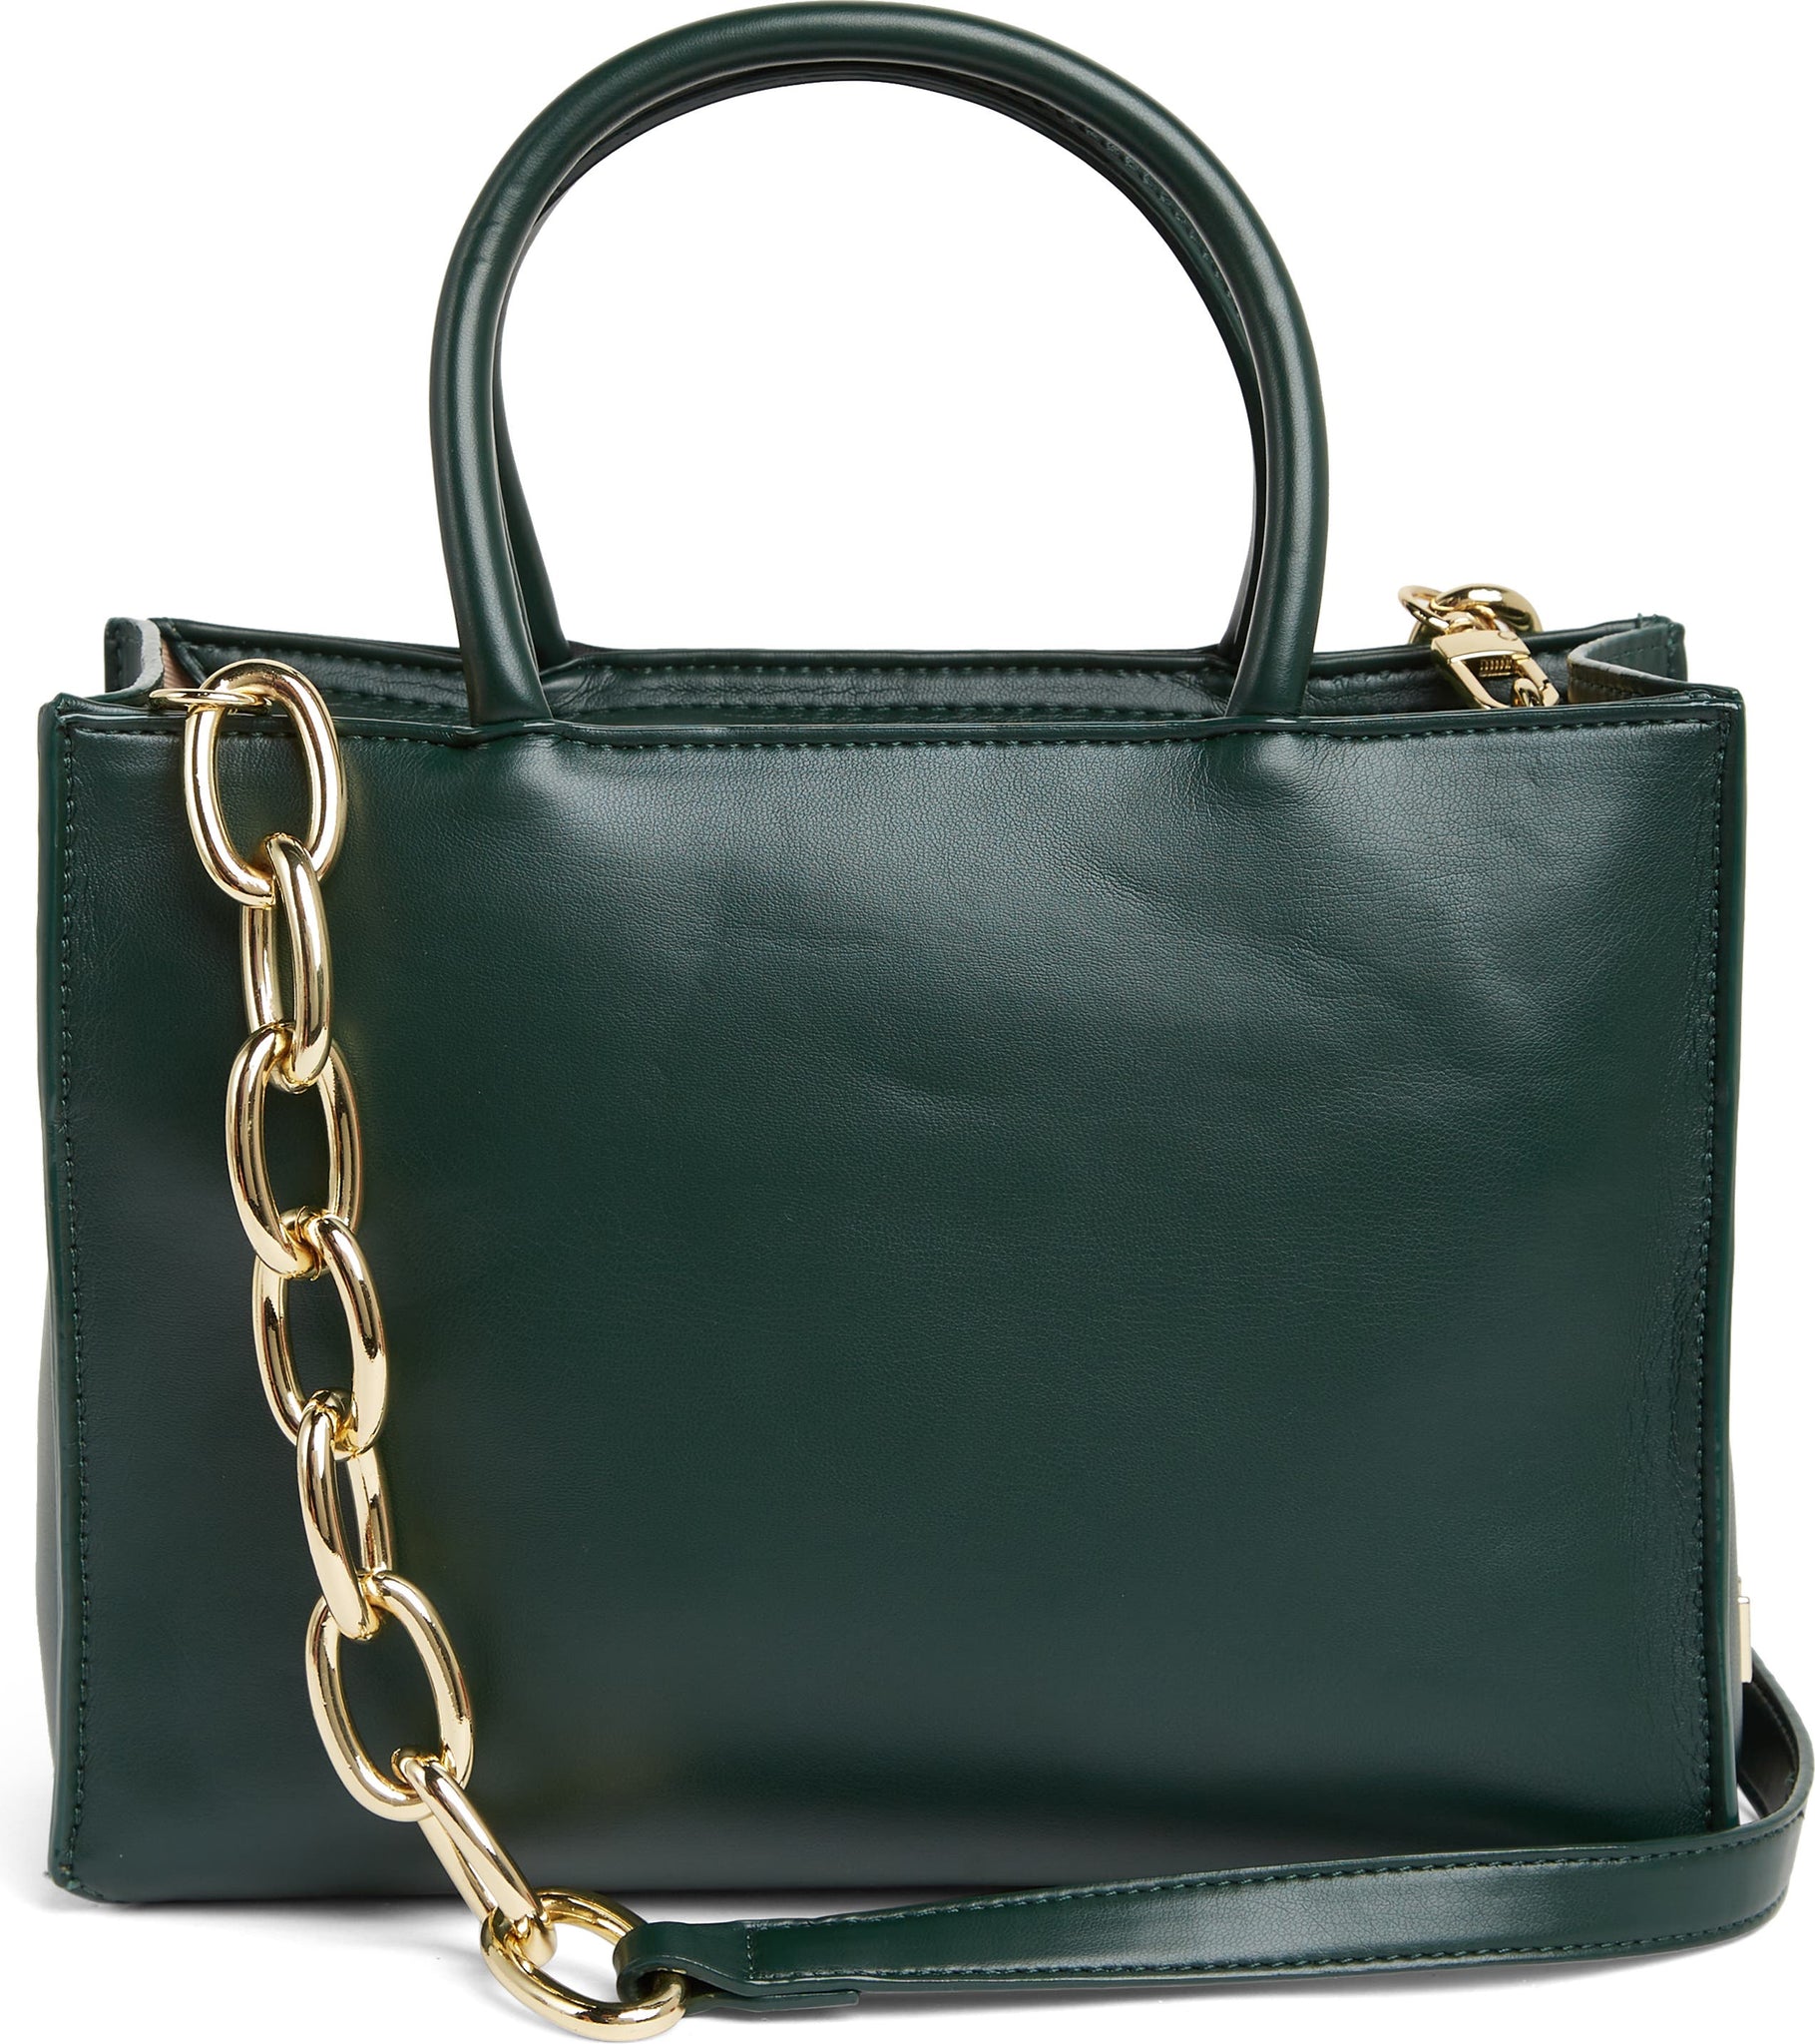 HOUSE OF WANT We Gram Vegan Leather Small Tote, Alternate, color, EVERGREEN